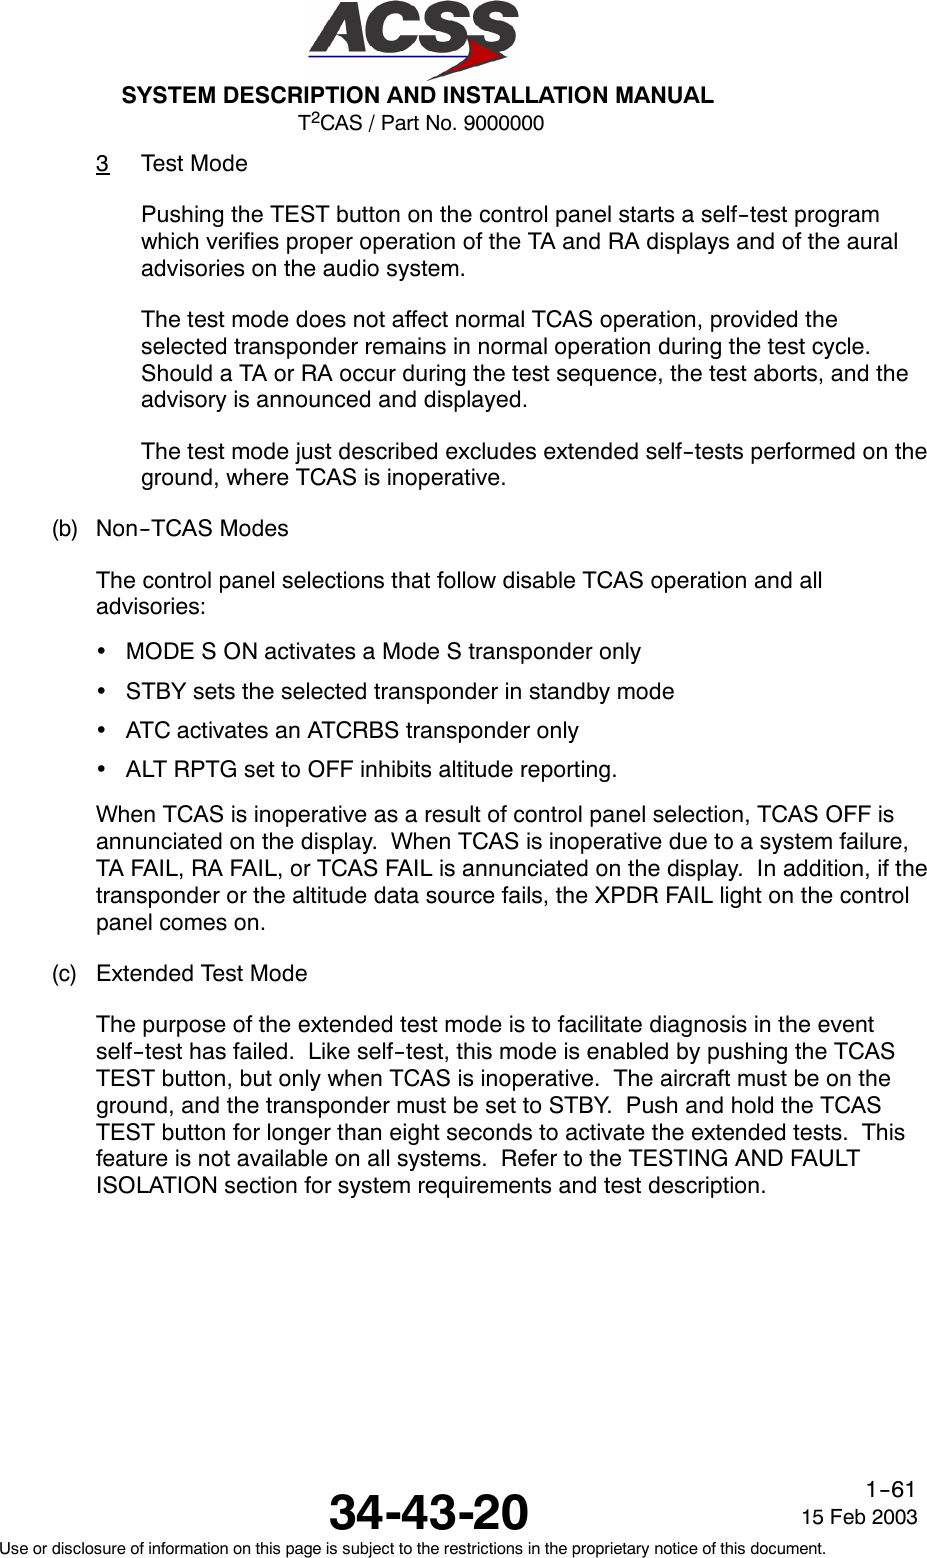 T2CAS / Part No. 9000000SYSTEM DESCRIPTION AND INSTALLATION MANUAL34-43-20 15 Feb 2003Use or disclosure of information on this page is subject to the restrictions in the proprietary notice of this document.1--613Test ModePushing the TEST button on the control panel starts a self--test programwhich verifies proper operation of the TA and RA displays and of the auraladvisories on the audio system.The test mode does not affect normal TCAS operation, provided theselected transponder remains in normal operation during the test cycle.Should a TA or RA occur during the test sequence, the test aborts, and theadvisory is announced and displayed.The test mode just described excludes extended self--tests performed on theground, where TCAS is inoperative.(b) Non--TCAS ModesThe control panel selections that follow disable TCAS operation and alladvisories:•MODE S ON activates a Mode S transponder only•STBY sets the selected transponder in standby mode•ATC activates an ATCRBS transponder only•ALT RPTG set to OFF inhibits altitude reporting.When TCAS is inoperative as a result of control panel selection, TCAS OFF isannunciated on the display. When TCAS is inoperative due to a system failure,TA FAIL, RA FAIL, or TCAS FAIL is annunciated on the display. In addition, if thetransponder or the altitude data source fails, the XPDR FAIL light on the controlpanel comes on.(c) Extended Test ModeThe purpose of the extended test mode is to facilitate diagnosis in the eventself--test has failed. Like self--test, this mode is enabled by pushing the TCASTEST button, but only when TCAS is inoperative. The aircraft must be on theground, and the transponder must be set to STBY. Push and hold the TCASTEST button for longer than eight seconds to activate the extended tests. Thisfeature is not available on all systems. Refer to the TESTING AND FAULTISOLATION section for system requirements and test description.